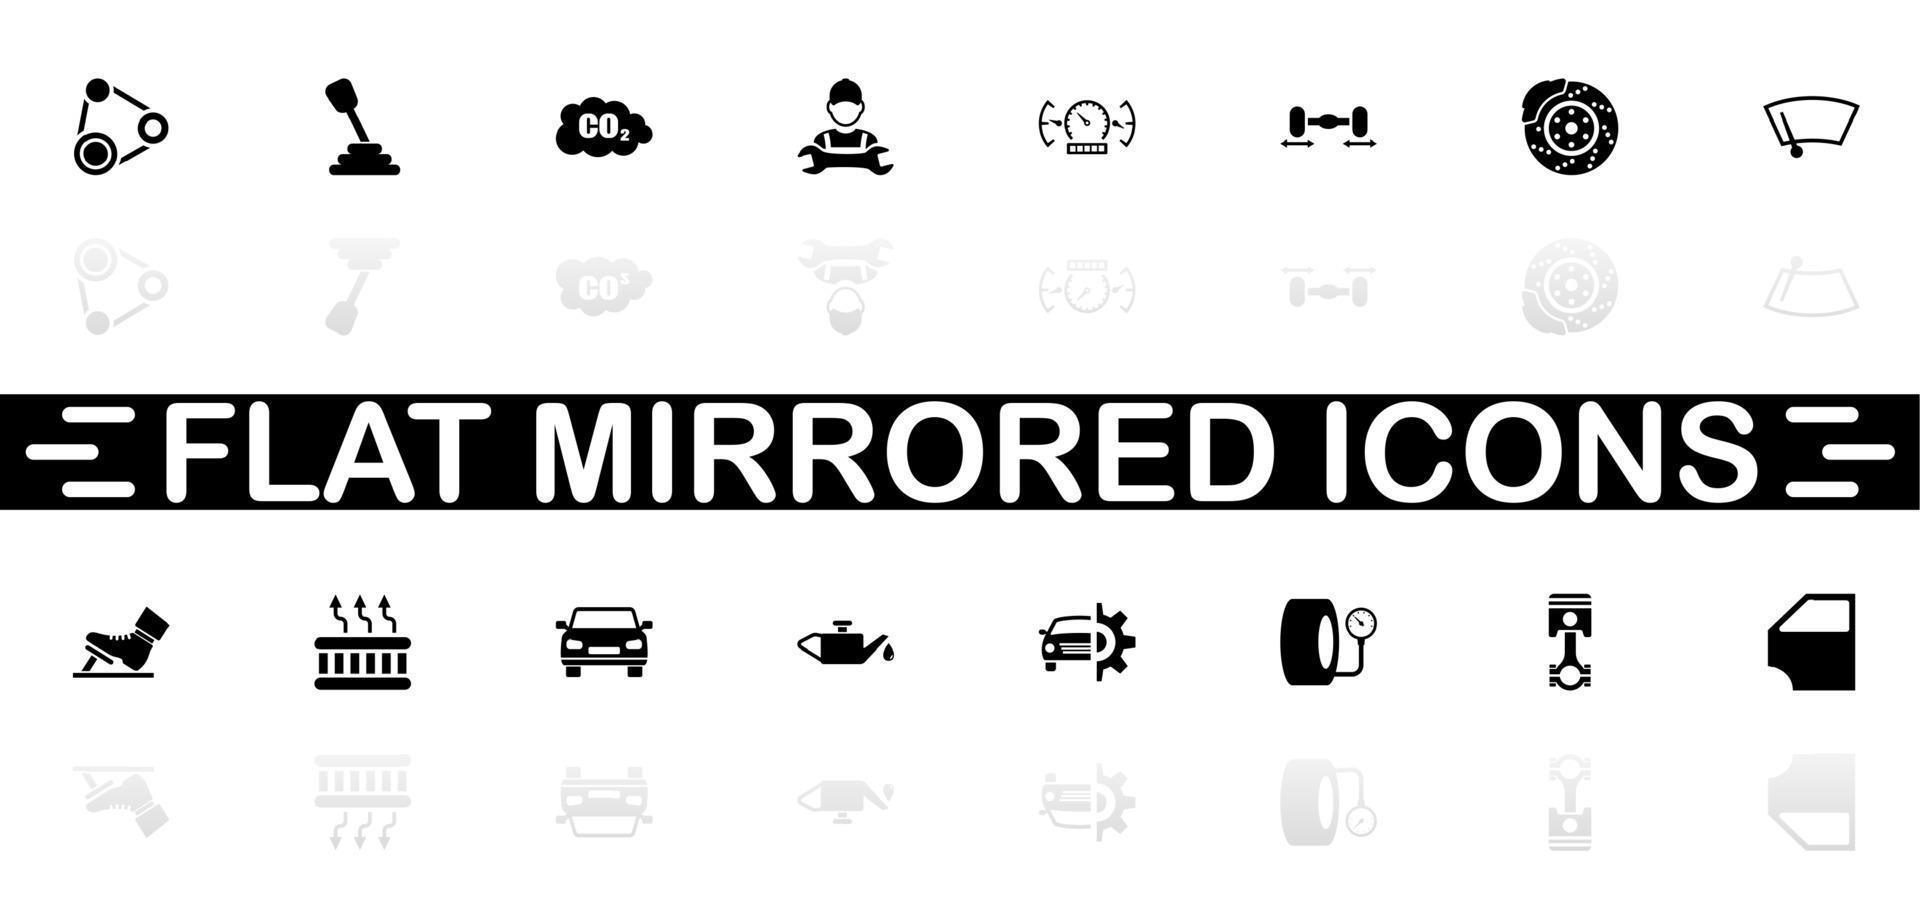 Auto icons - Black symbol on white background. Simple illustration. Flat Vector Icon. Mirror Reflection Shadow. Can be used in logo, web, mobile and UI UX project.